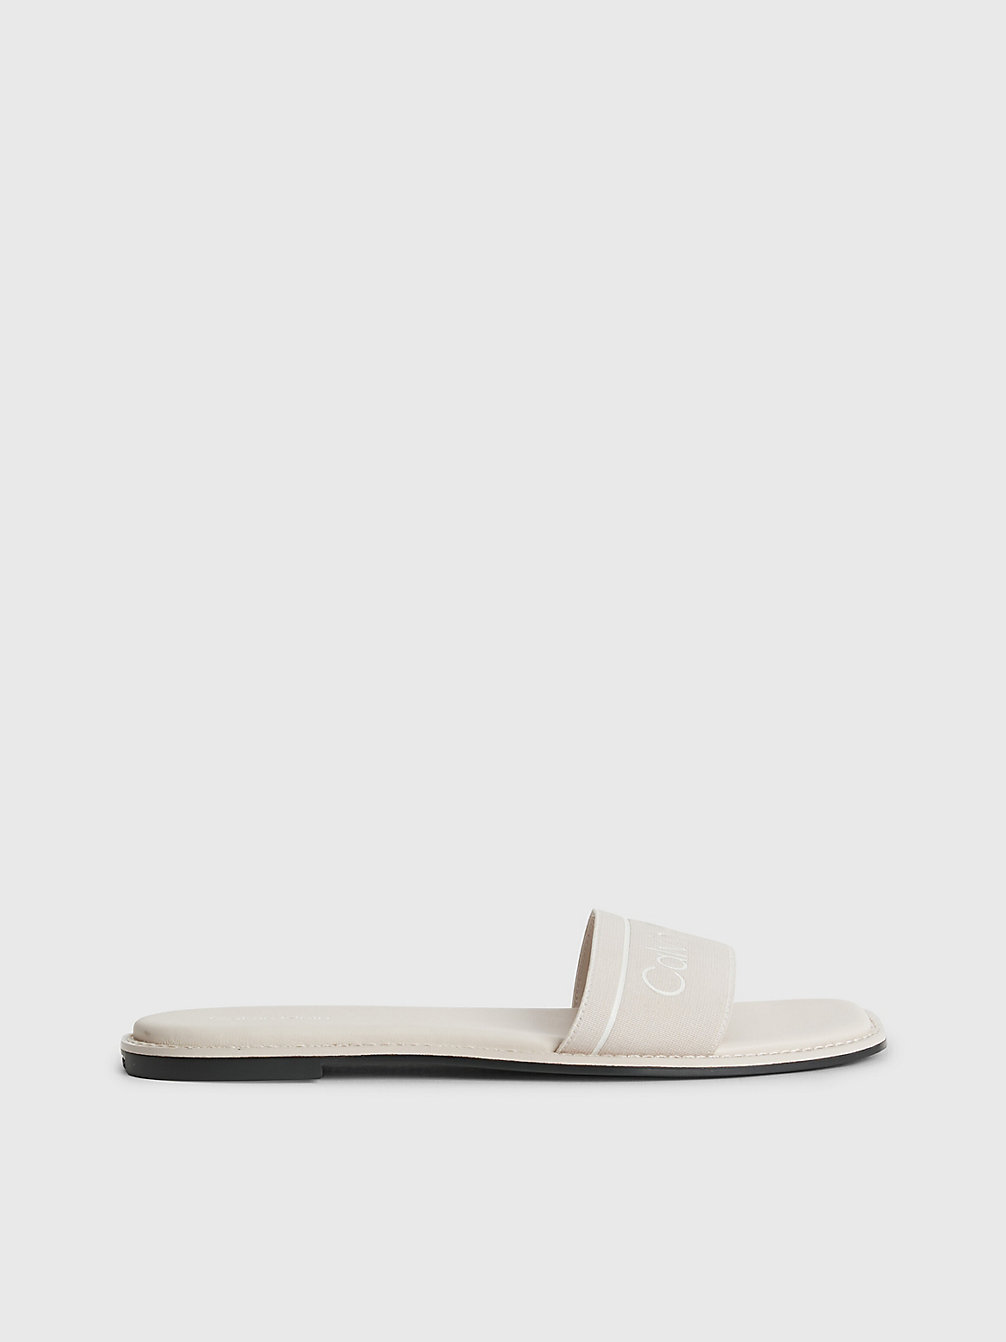 CRYSTAL GRAY Square Toe Sandals undefined women Calvin Klein